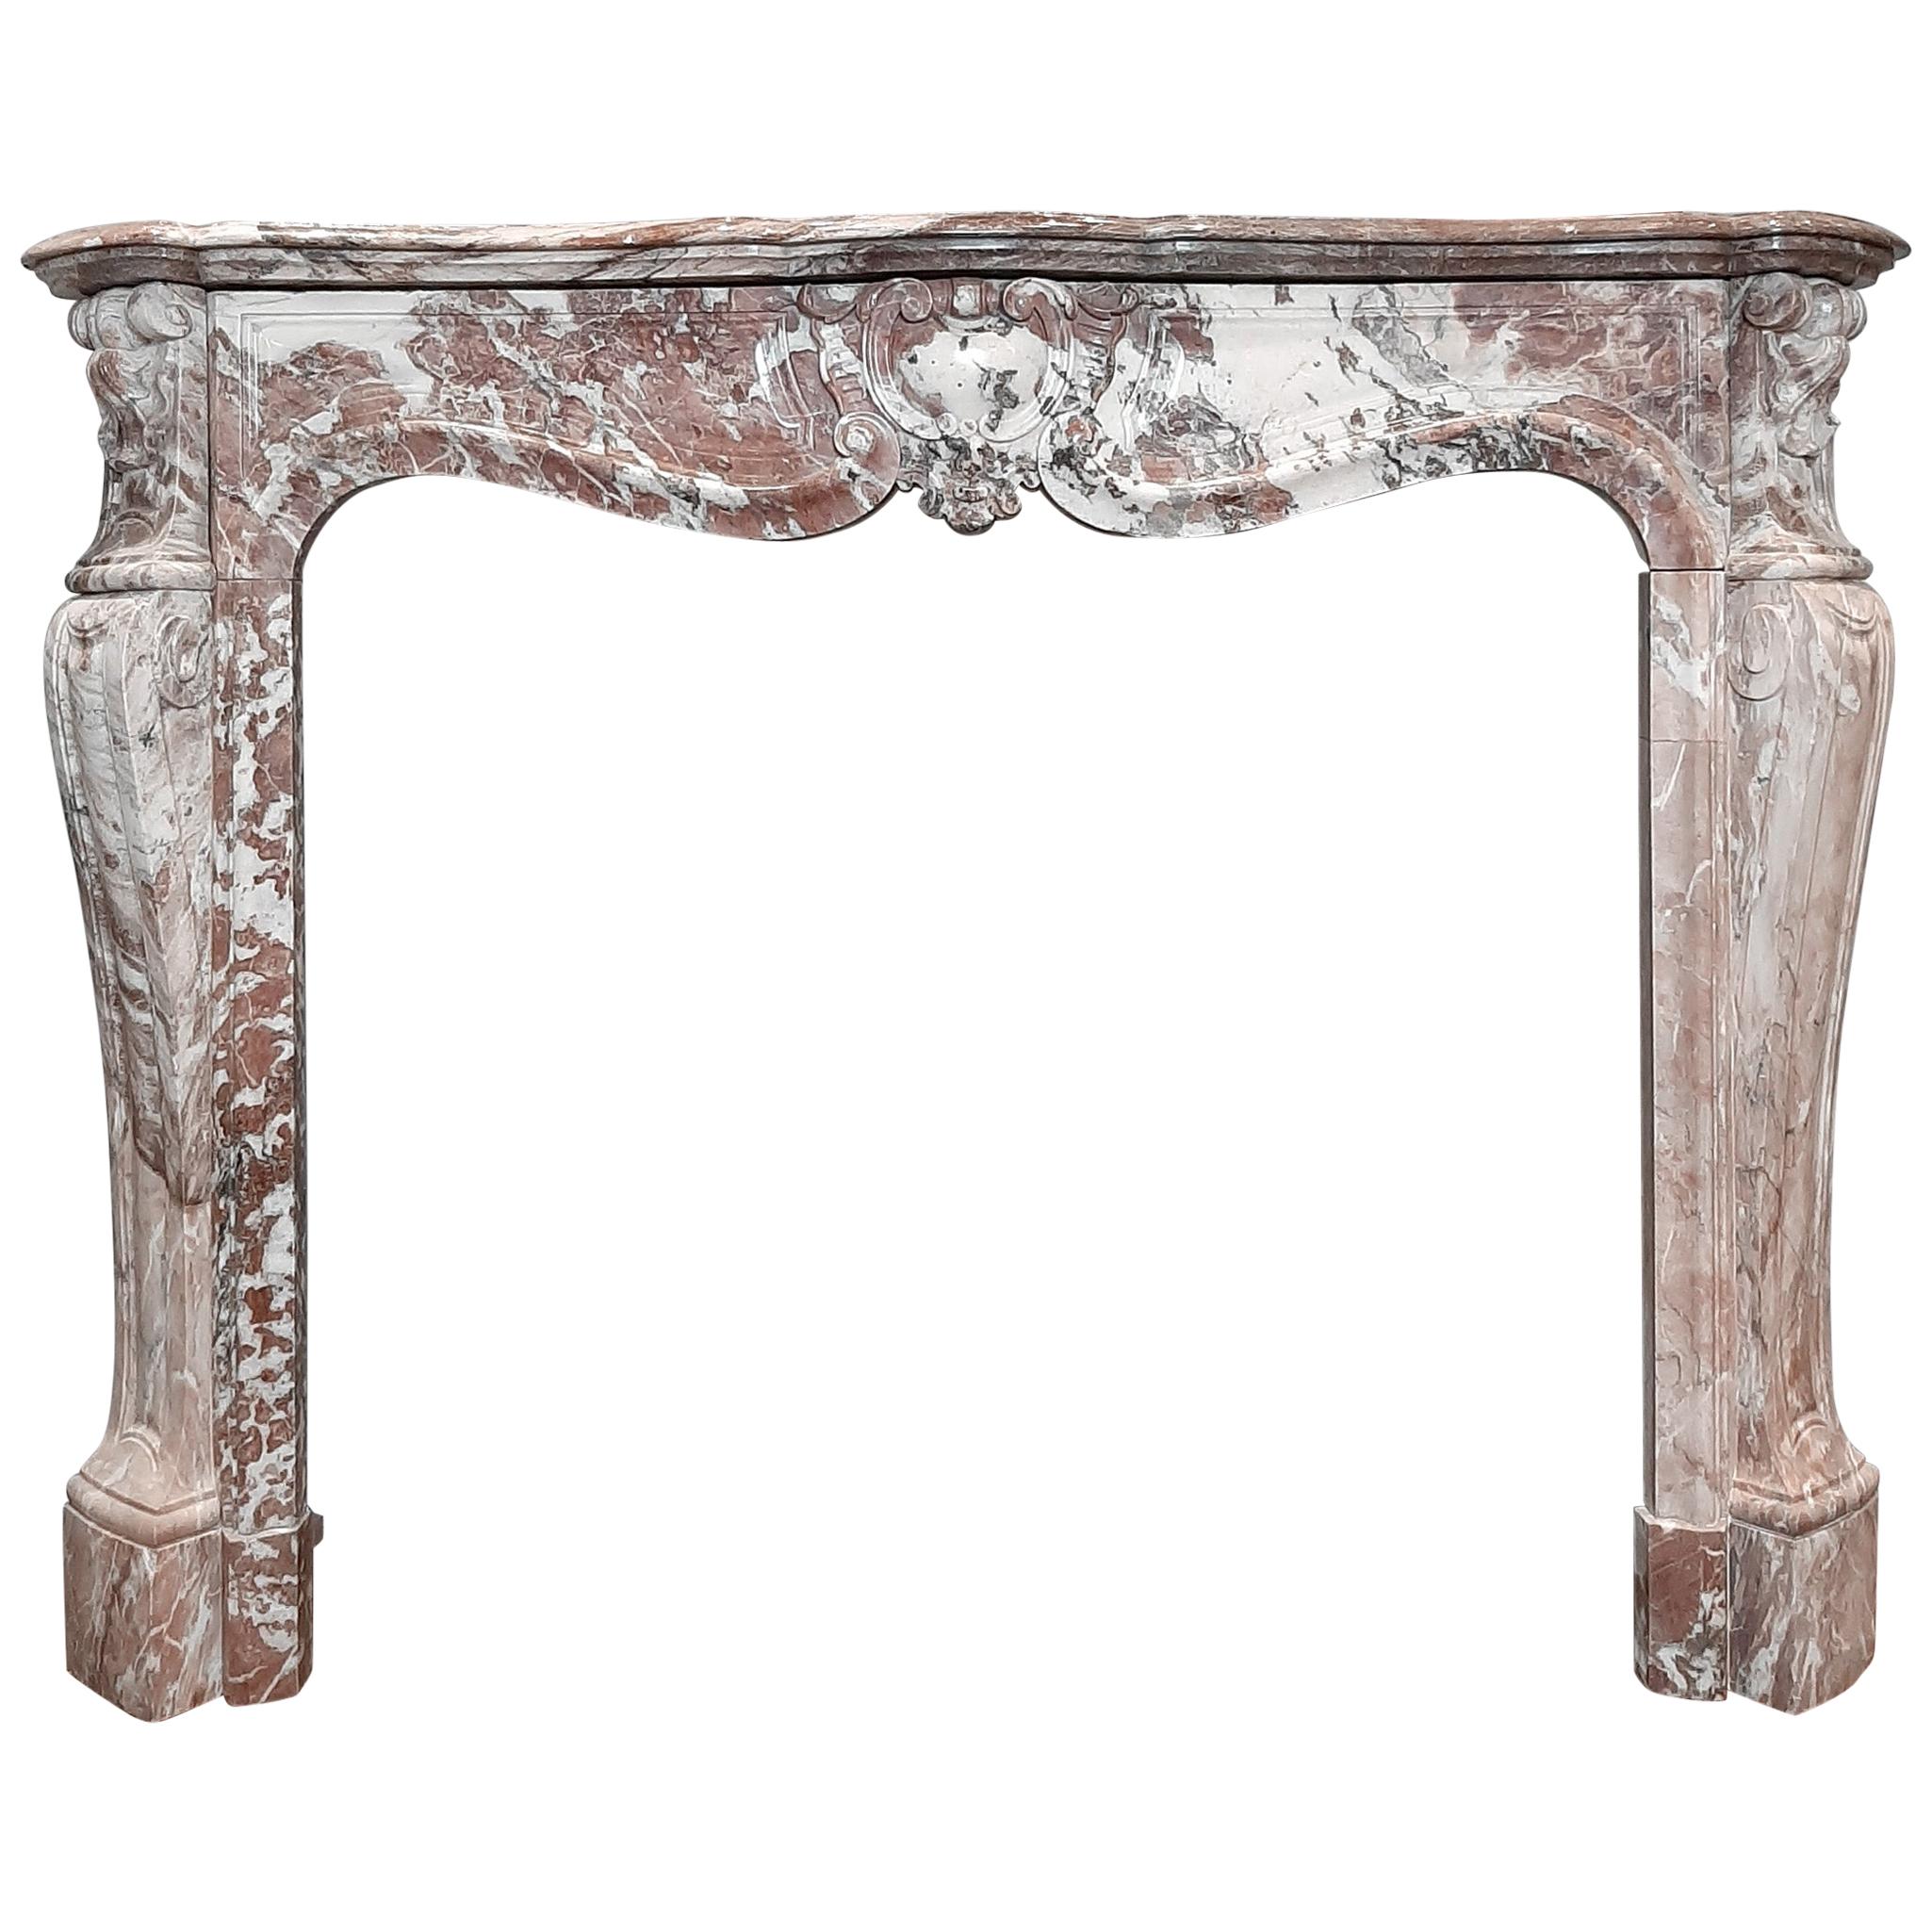 Antique French trois coquilles fireplace in violet, pink and white color tones. This mantel (fireplace) piece gets it's lovely coloring from the Violet de Villette marble.

Dimensions: H 111 x W 142 x D 40 cm
Inside dimensions: H 90 x W 102 cm

This